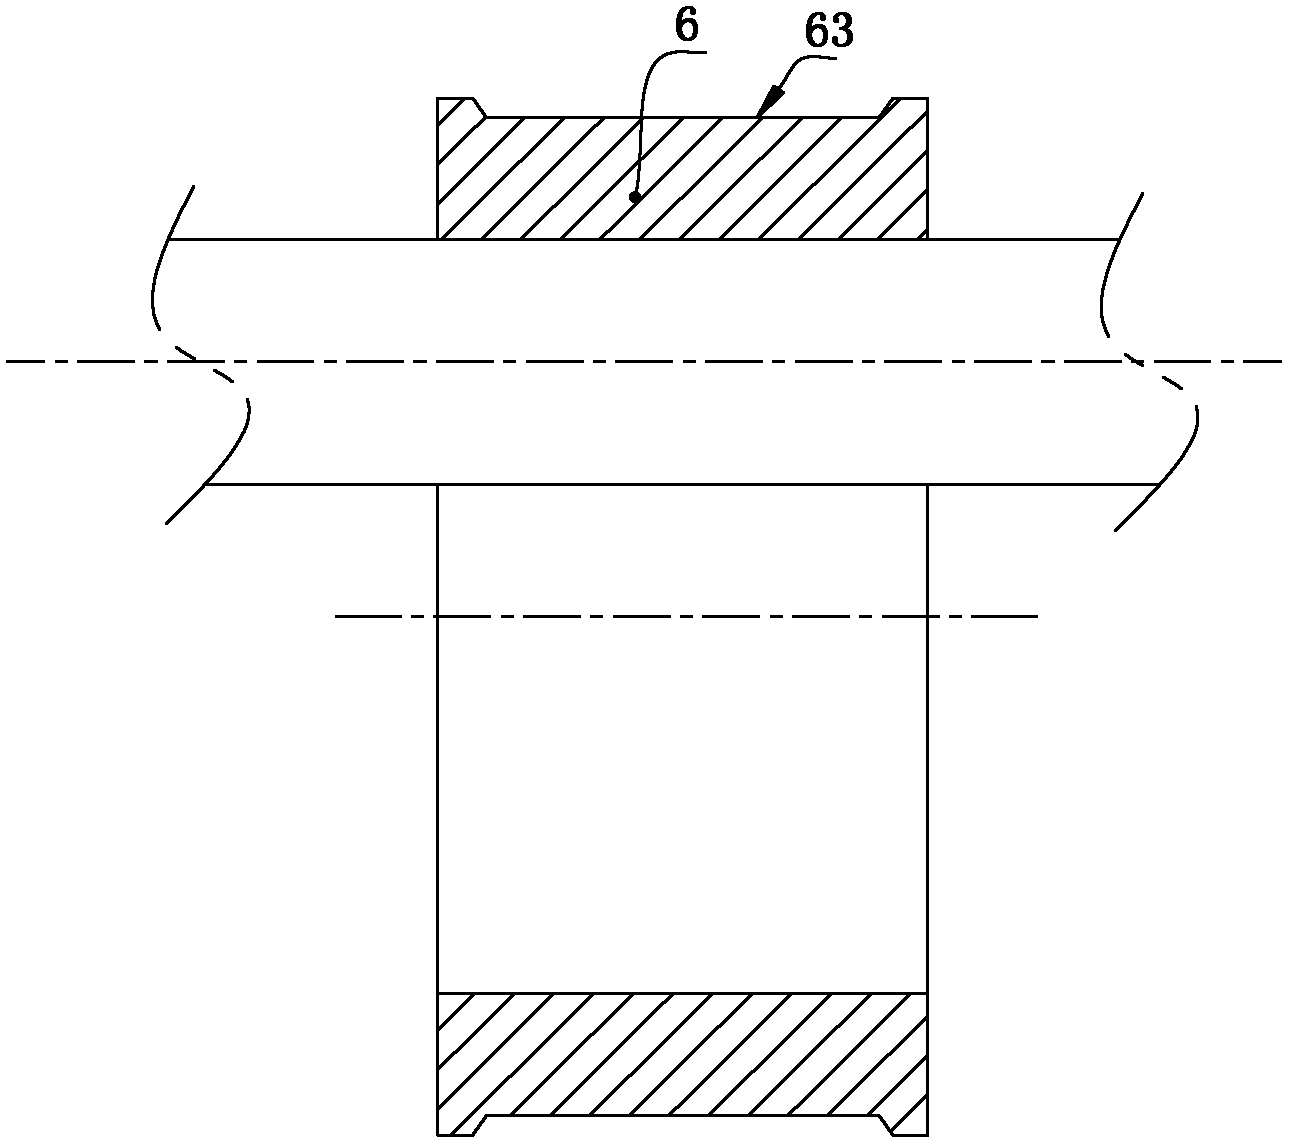 Forging forming process of heteromorphic transition section of super large pressure vessel